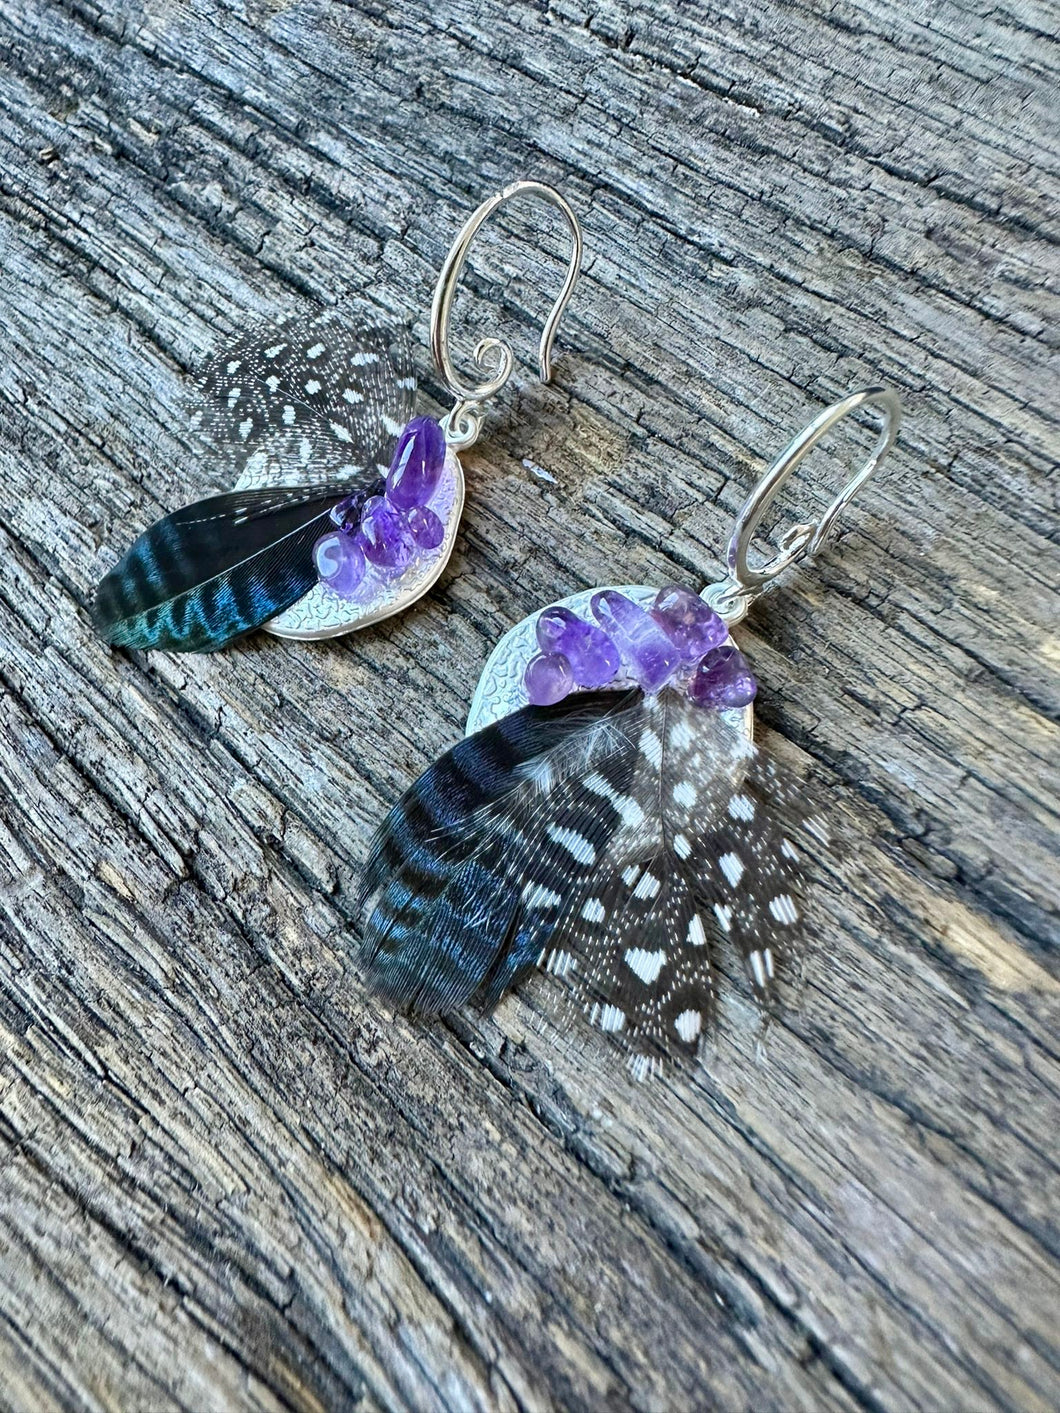 Speckled blues with amethyst